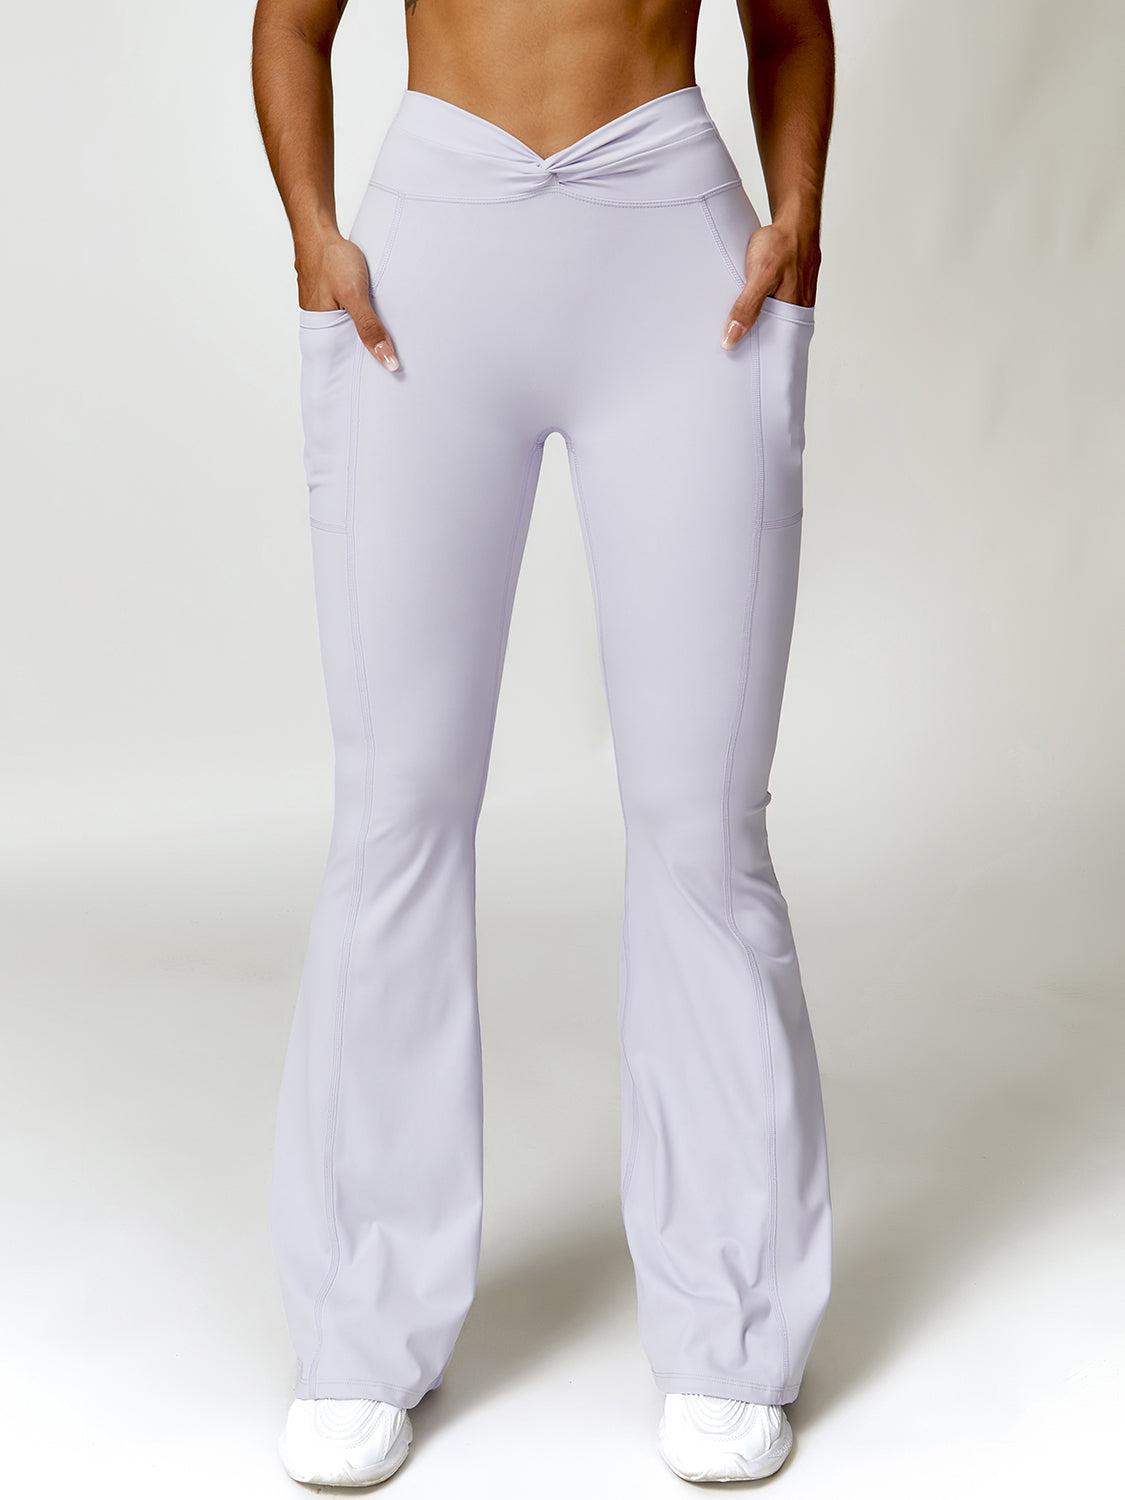 a woman in white pants is posing for a picture